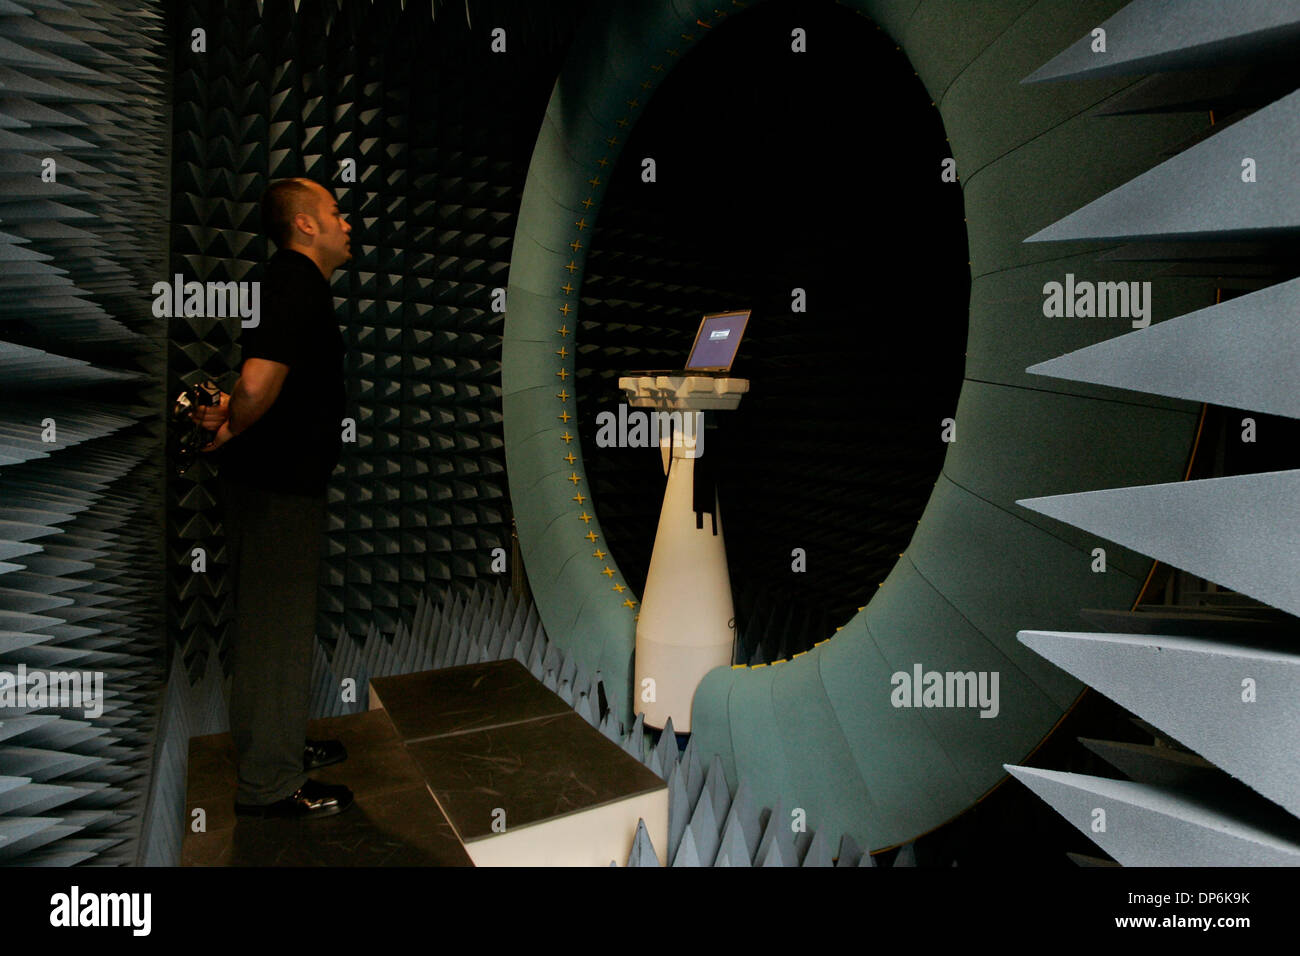 Oct 18, 2006; Carlsbad, CA, USA; Senior RF engineering technician ROMAN OLMOS waits as a laptop boots up inside an anechoic chamber at Sierra Wireless on Wednesday in Carlsbad, California. Olmos is testing  the company's wireless card inside the laptop. The room is used to measure over the air performance of wireless products in a controlled environment. Mandatory Credit: Photo by  Stock Photo